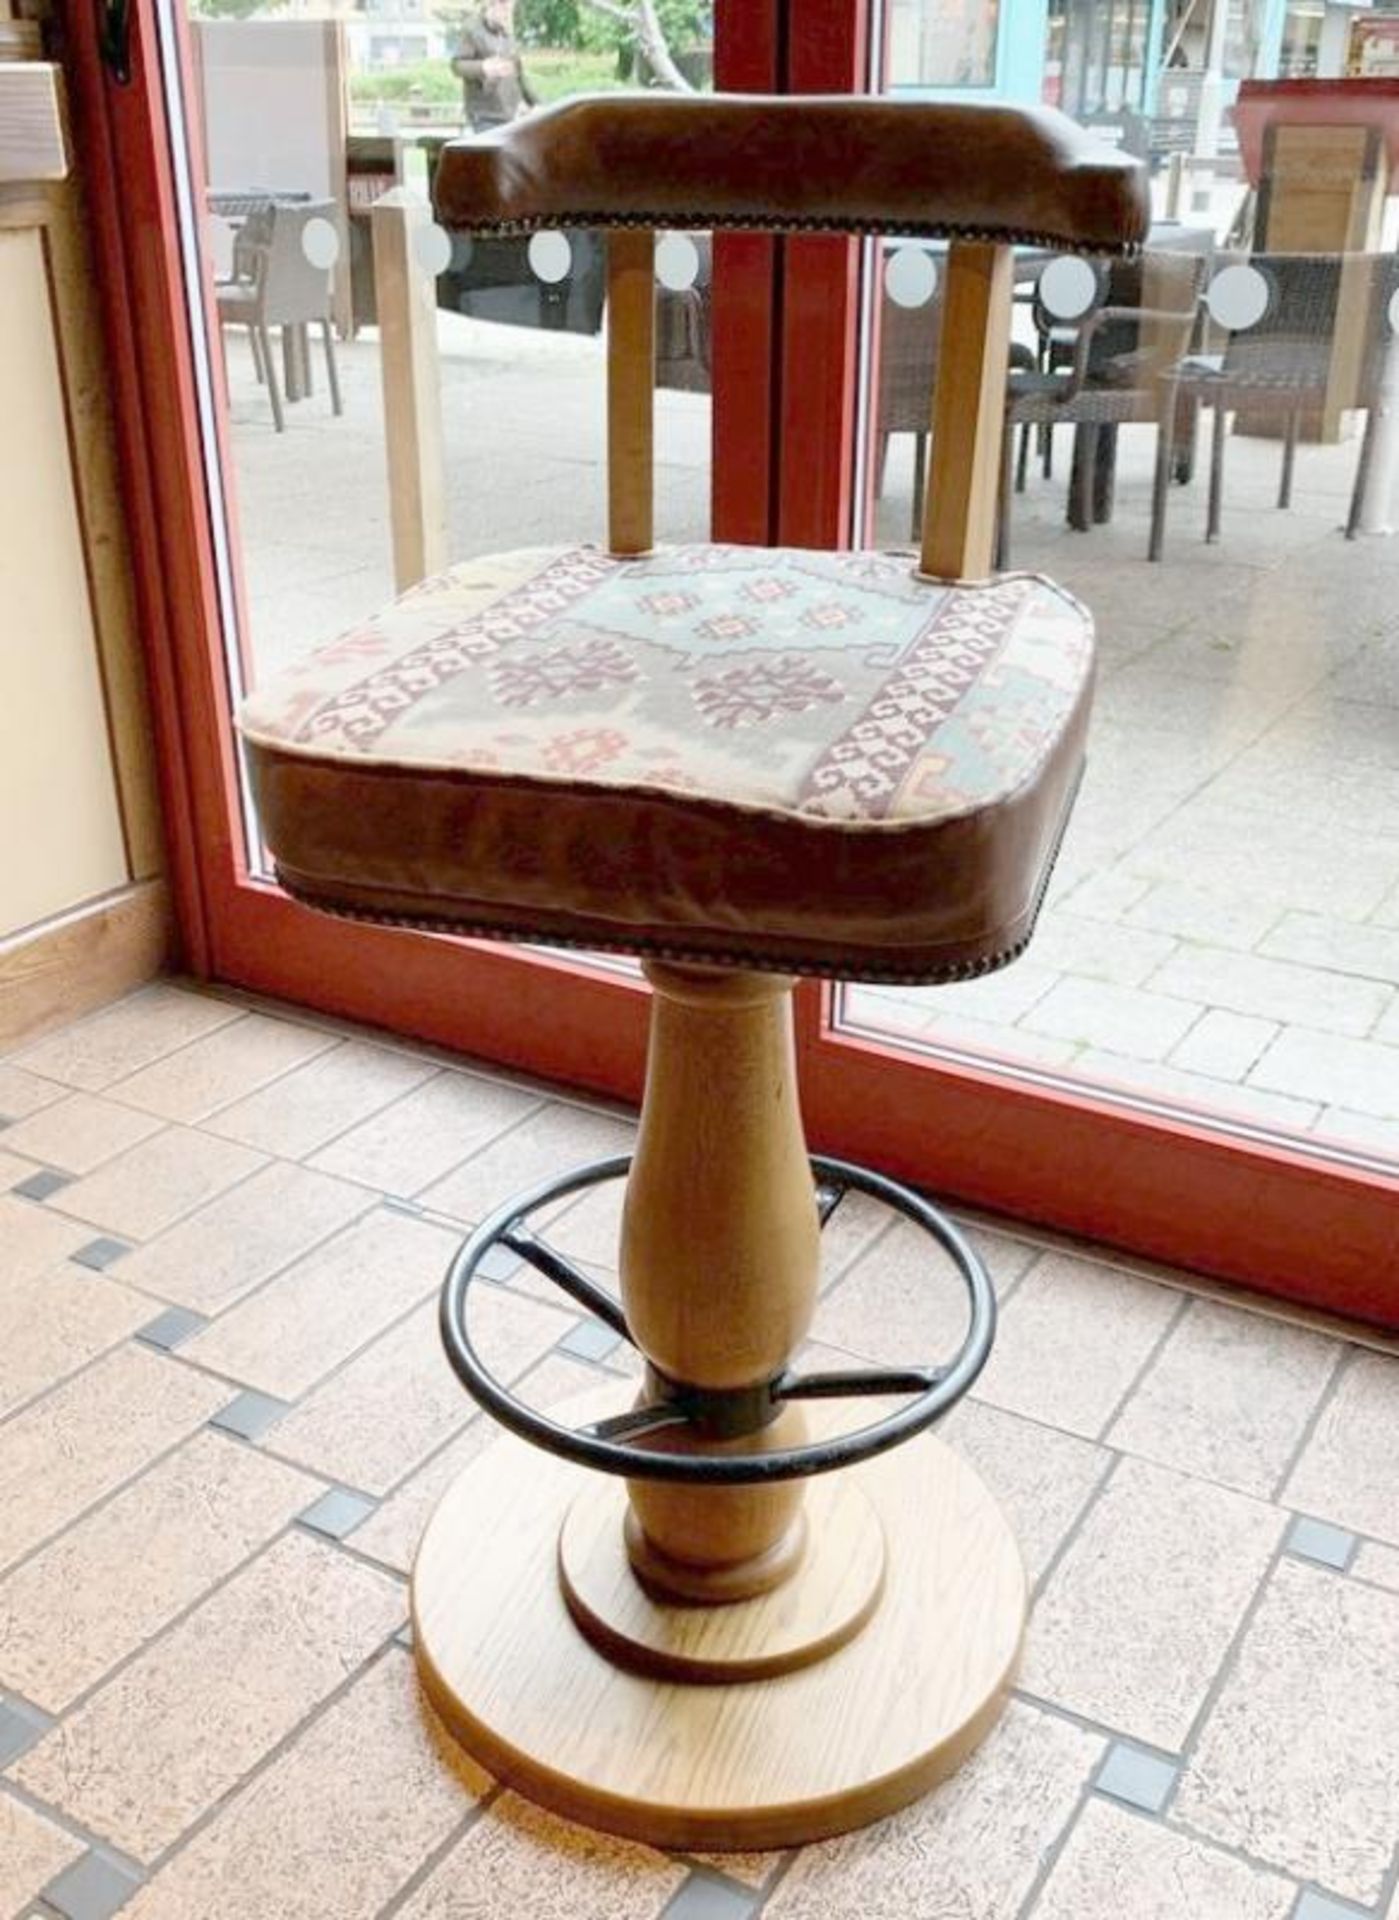 6 x Wood And Upholstered Bar Stools - Dimensions: H108cm x W45cm - CL339 - From a Popular Mexican Th - Image 3 of 3